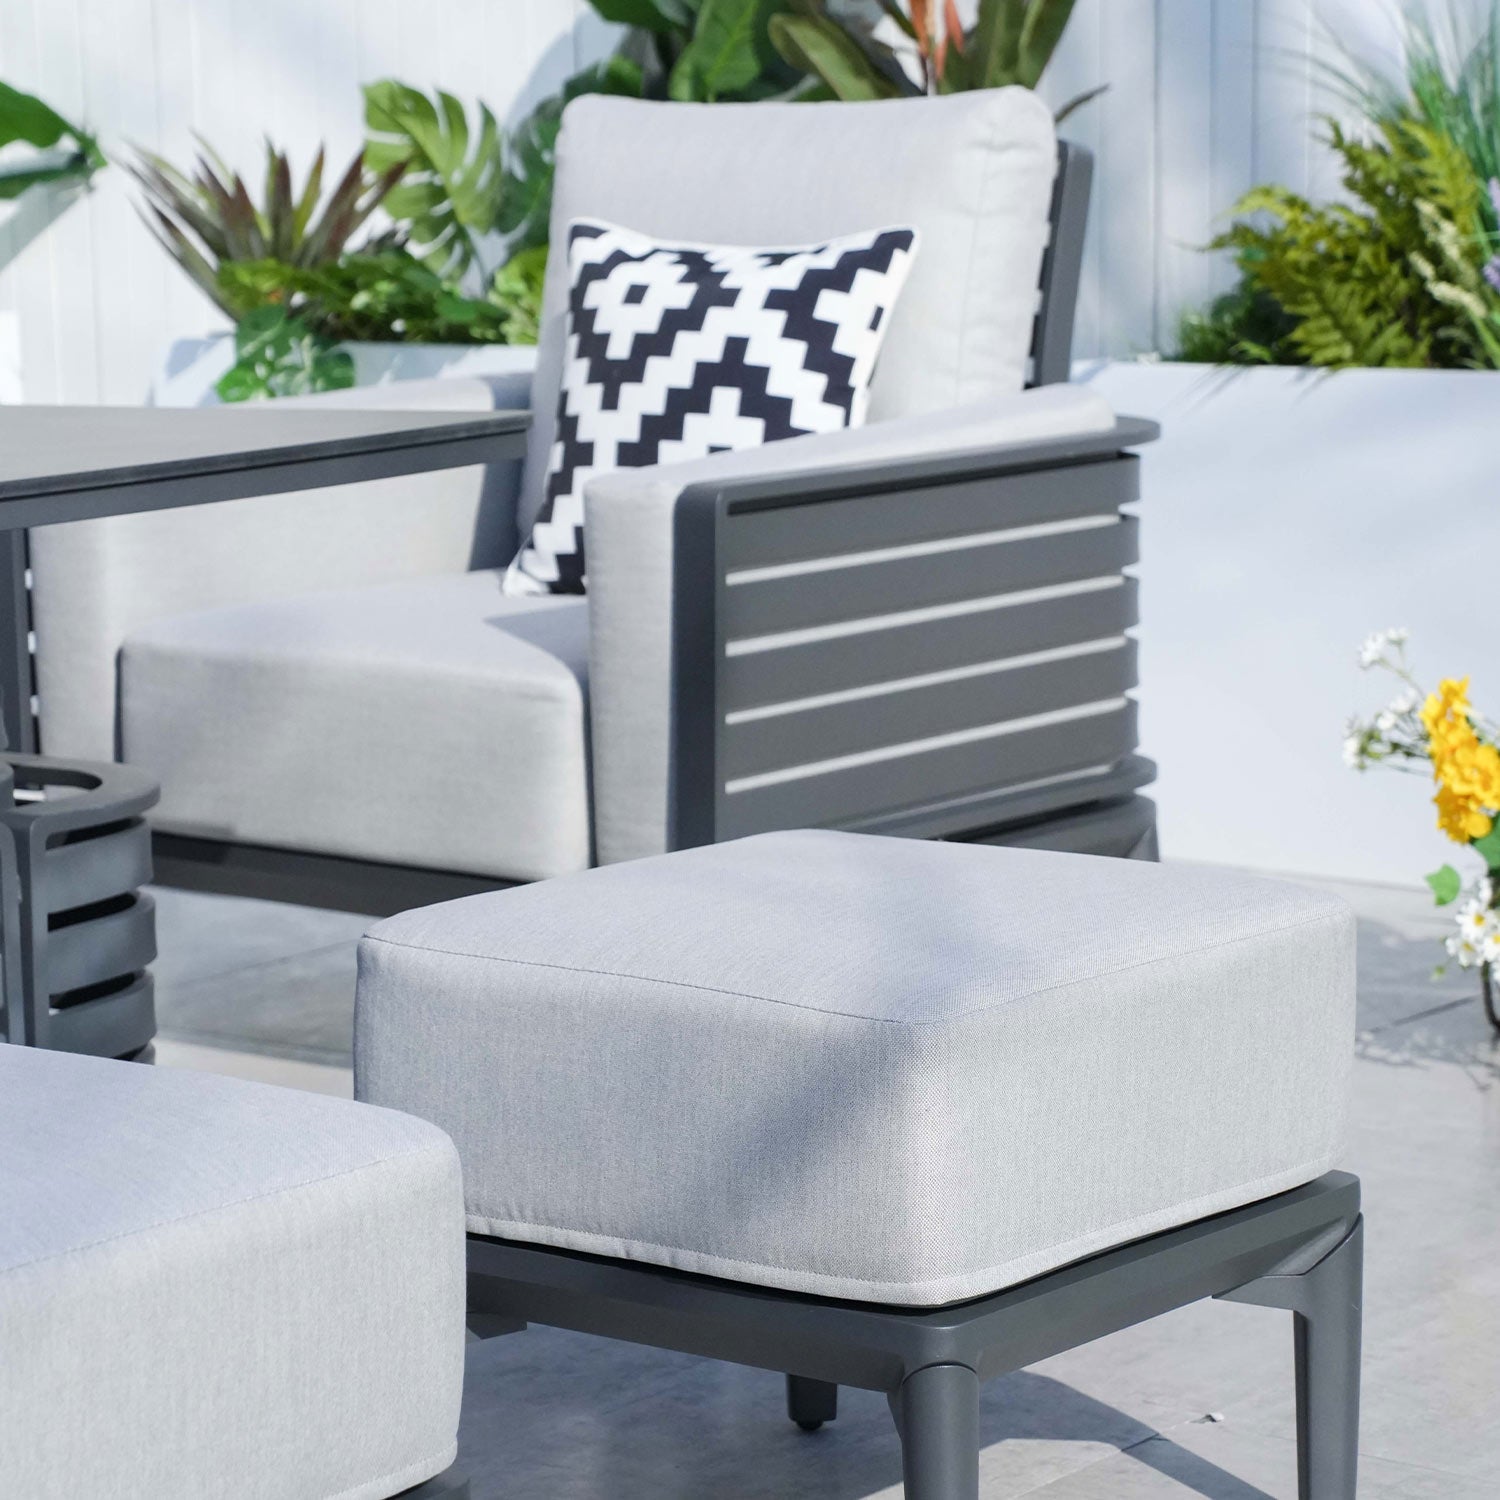 Pre-order Abrihome 7-Pieces Patio Garden Aluminum Seating Set with Armchairs